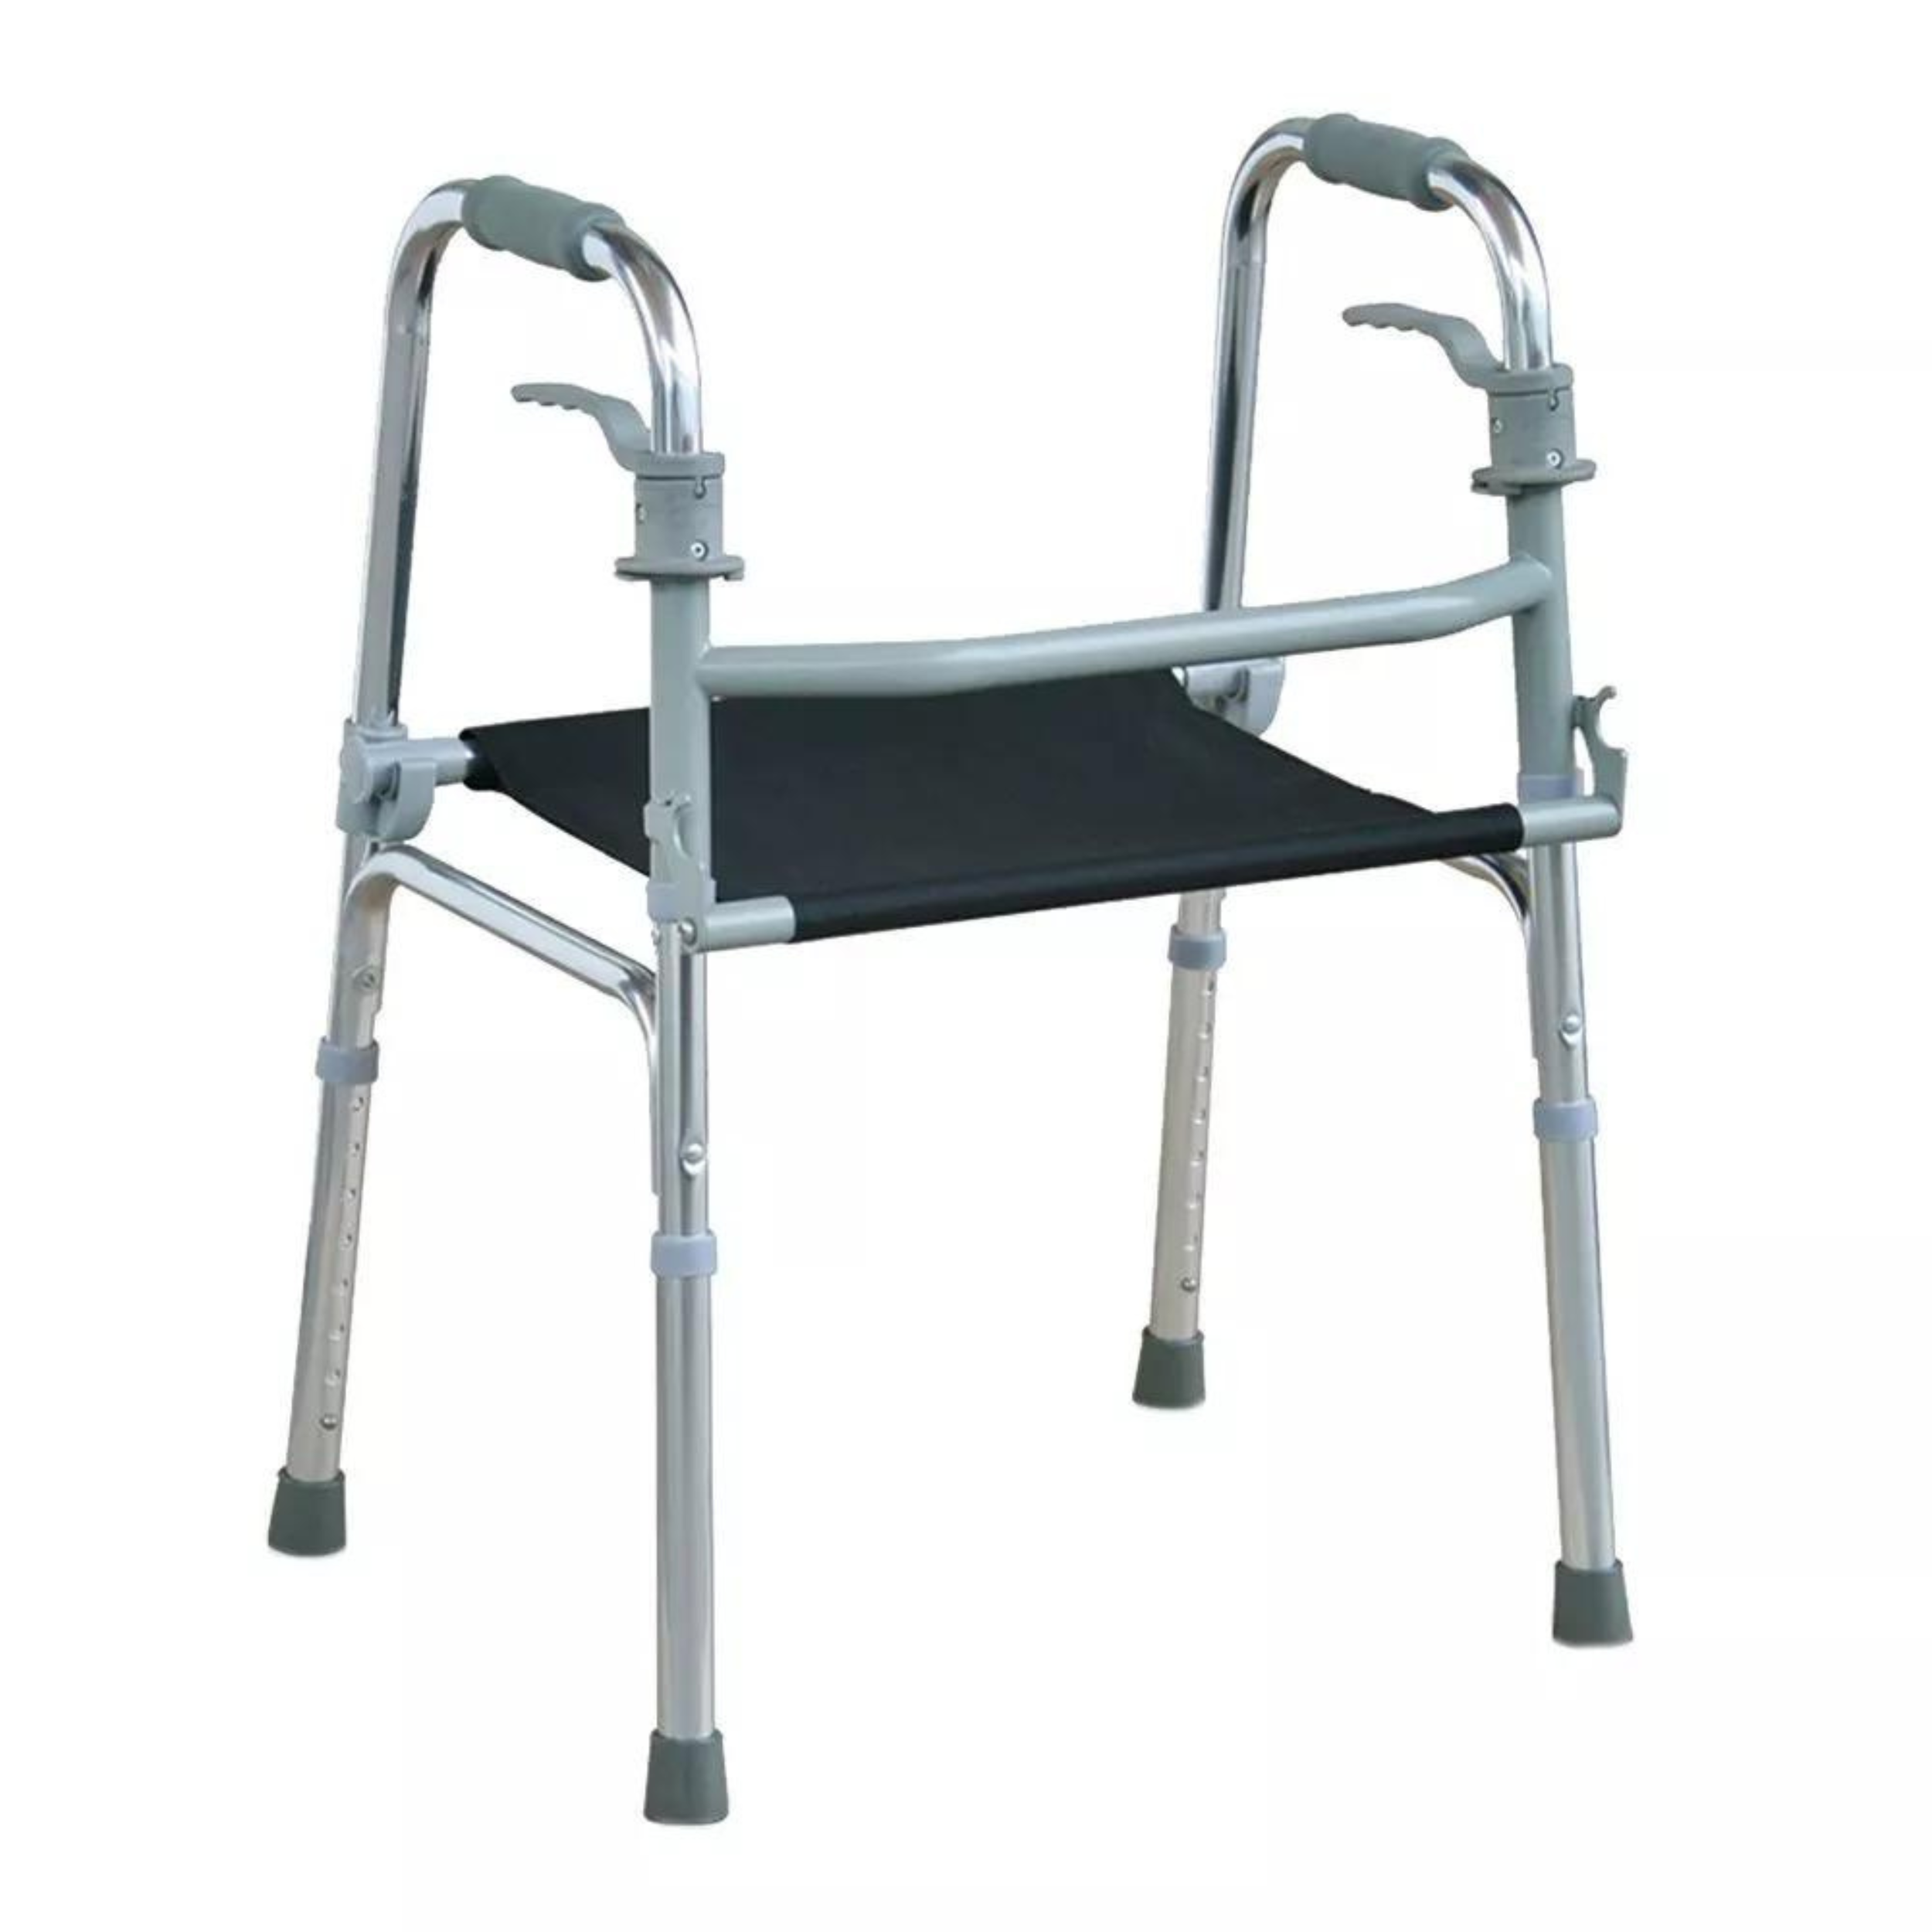 Wolaid Trigger Folding Seated Walker